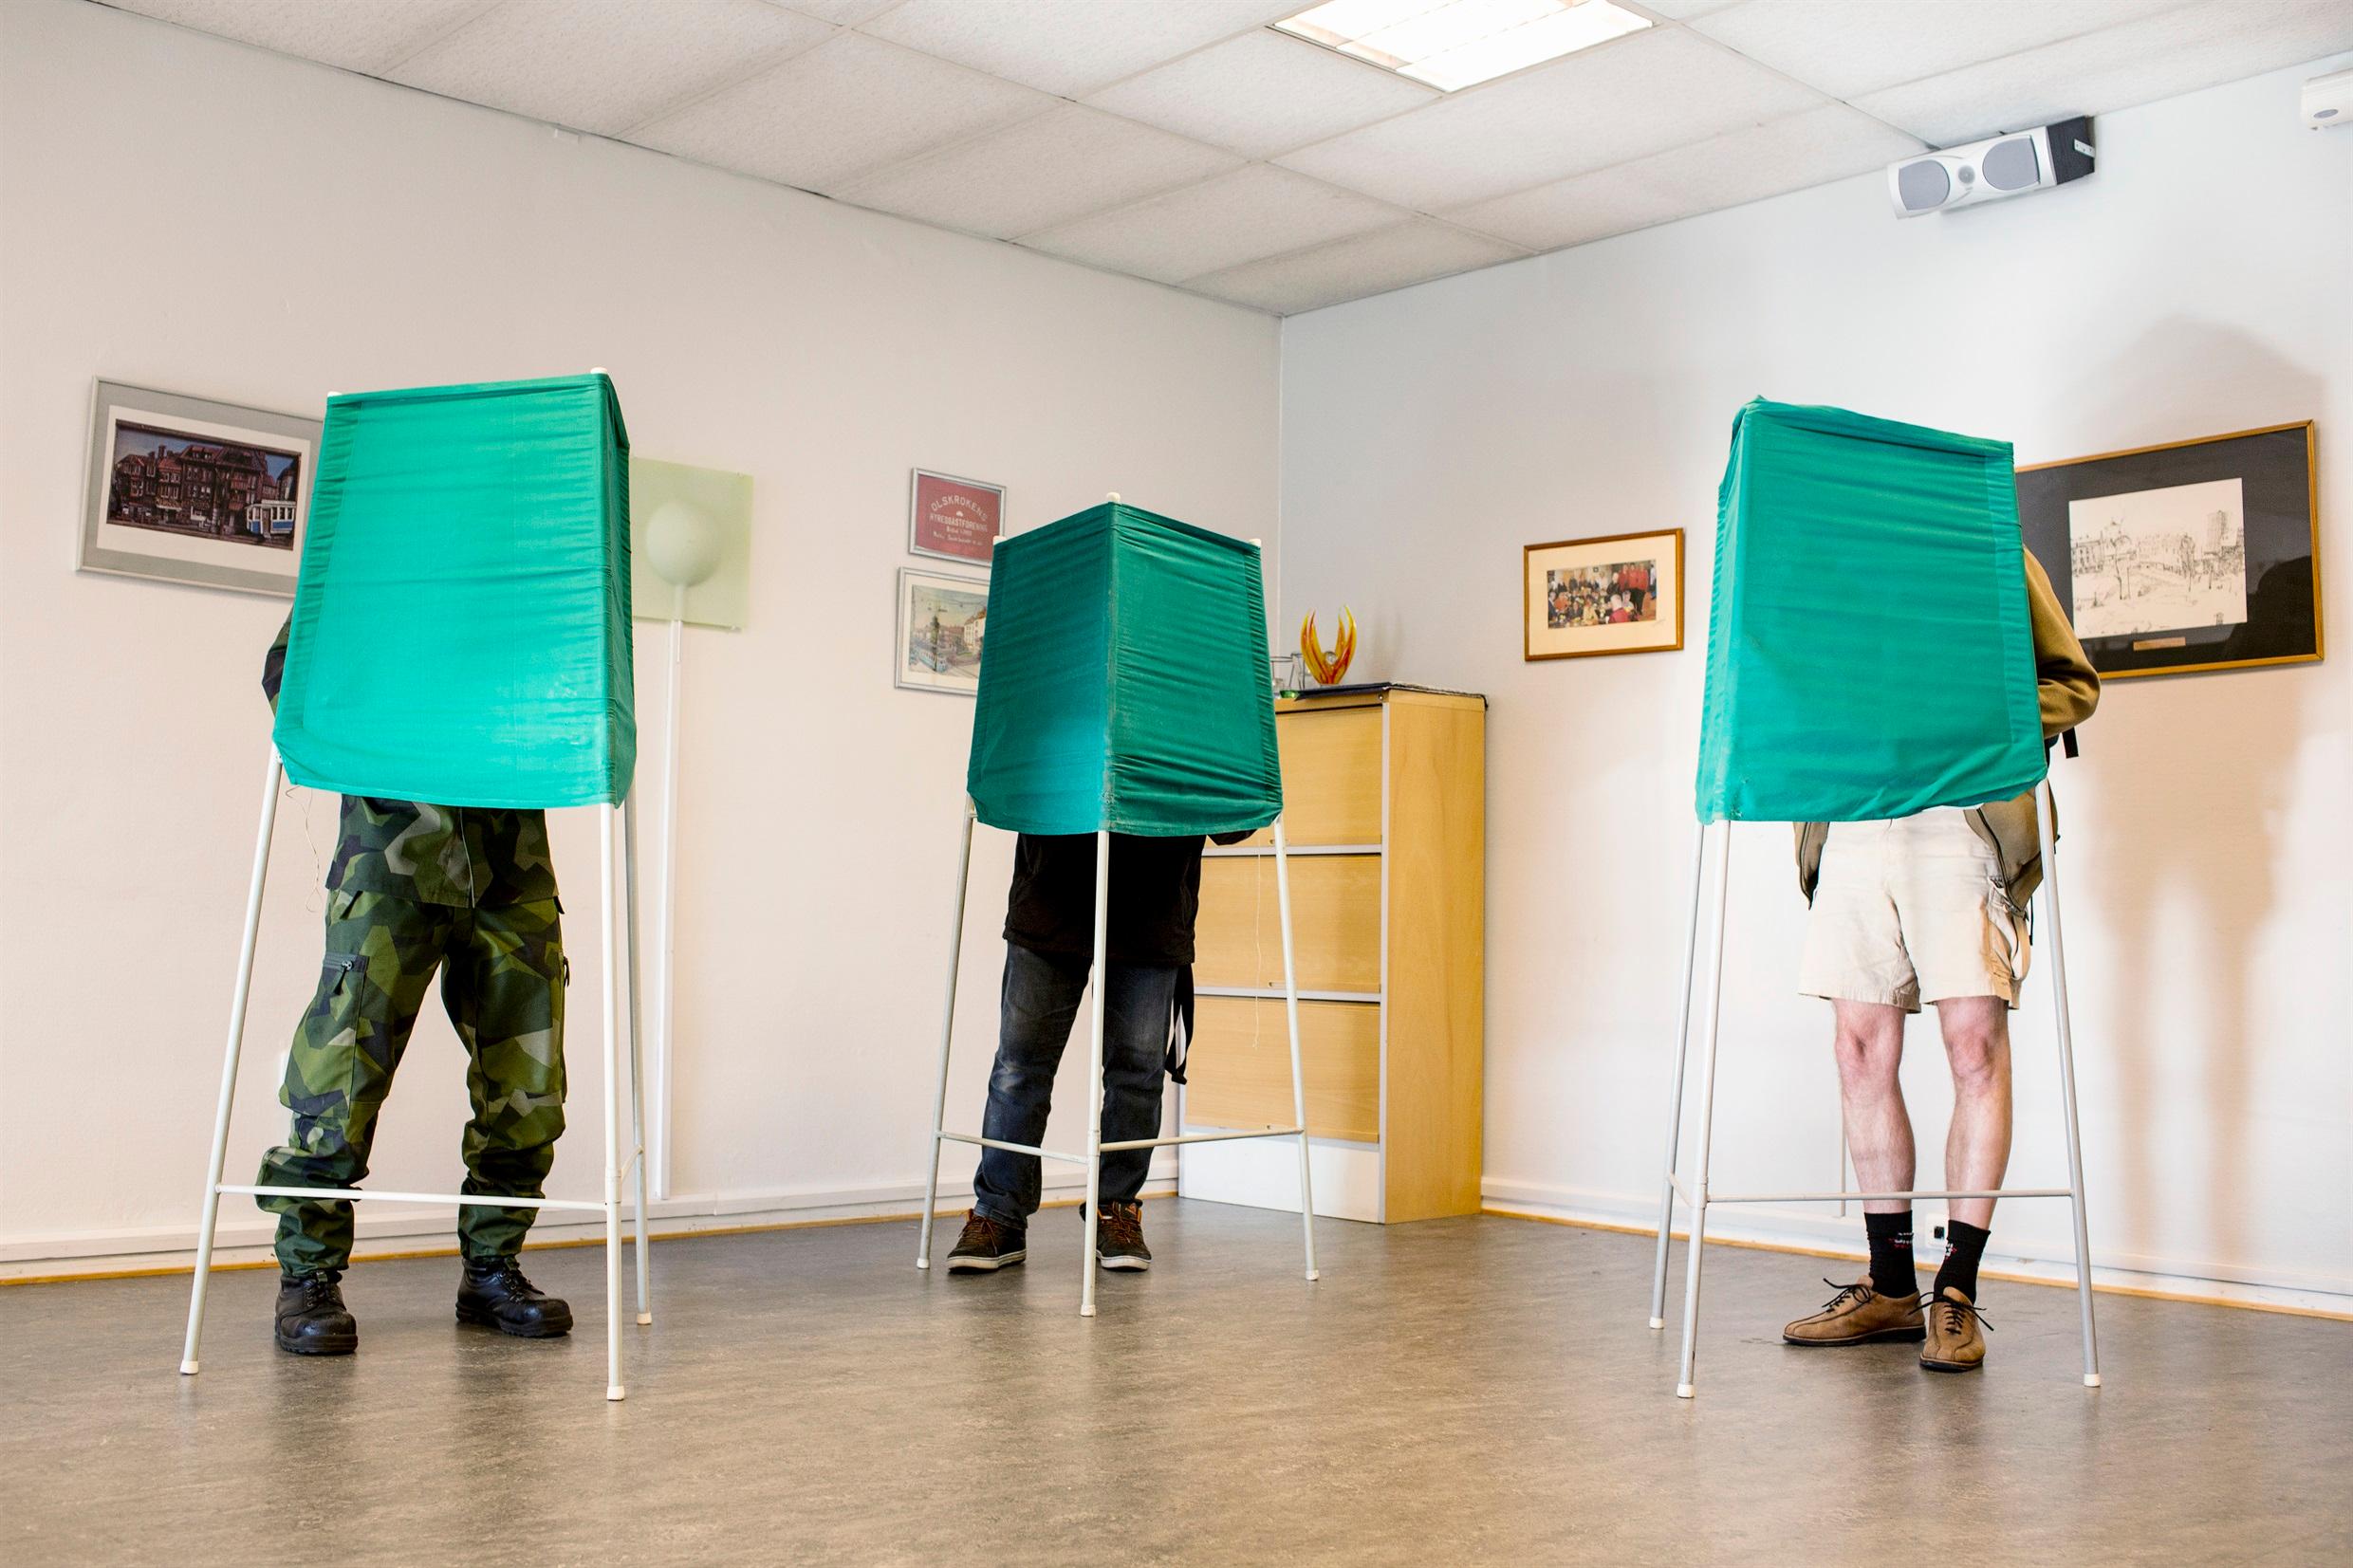 A polling station, where all we can see is three people's legs beneth green screens.